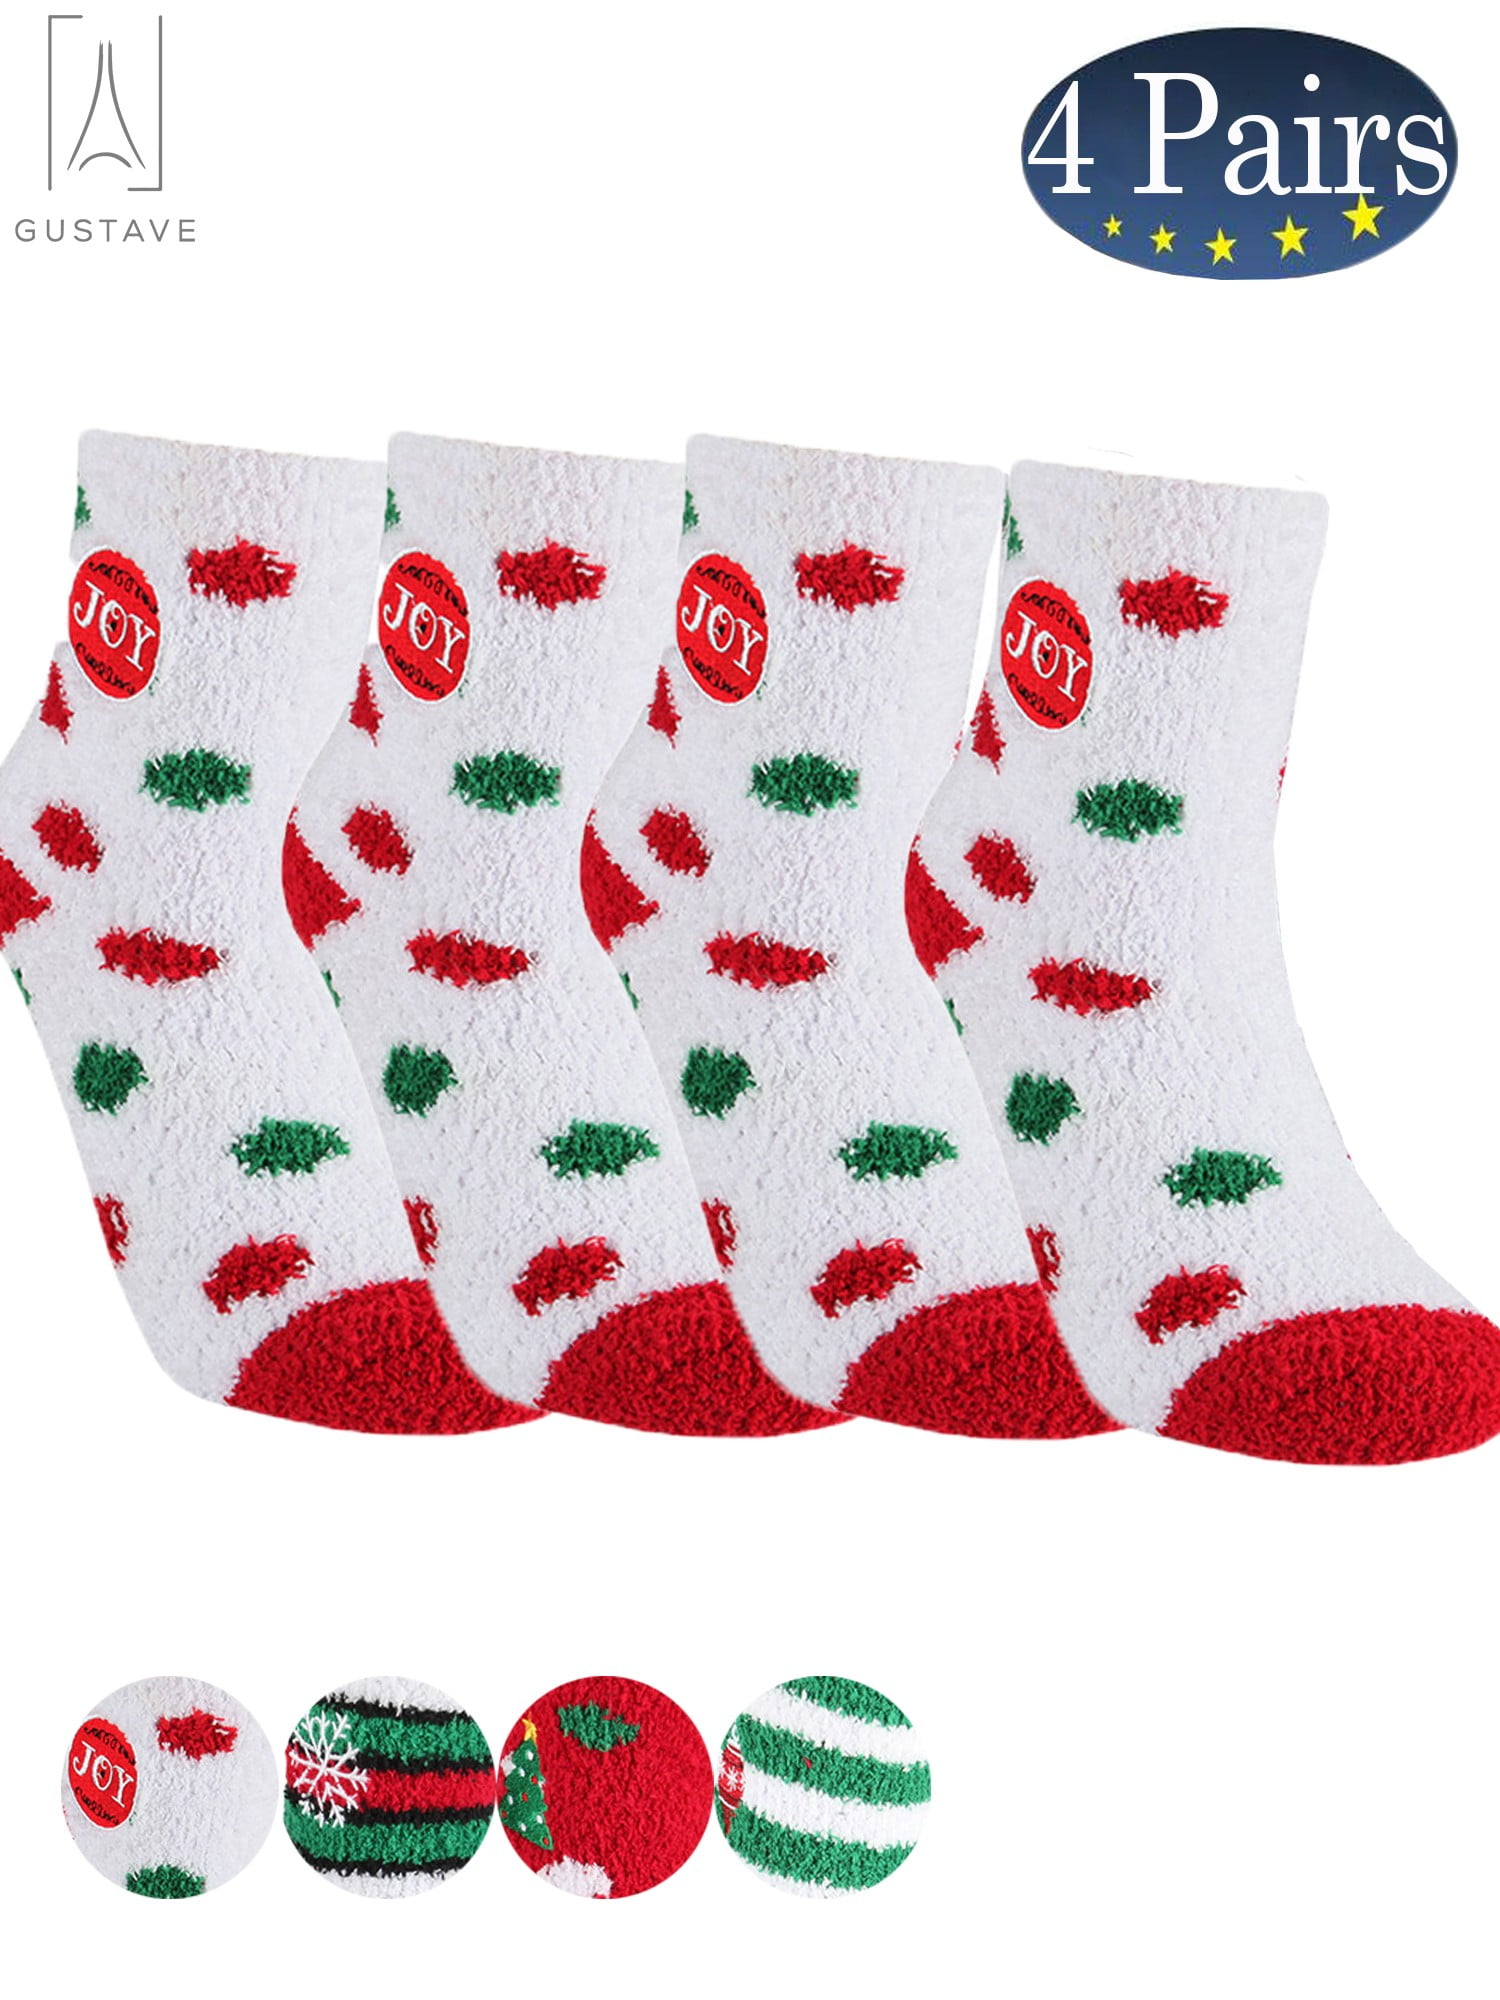 BATH & BODY WORKS CANDY CANE STICK SHEA BUTTER INFUSED NON SKID SOCKS CHRISTMAS 